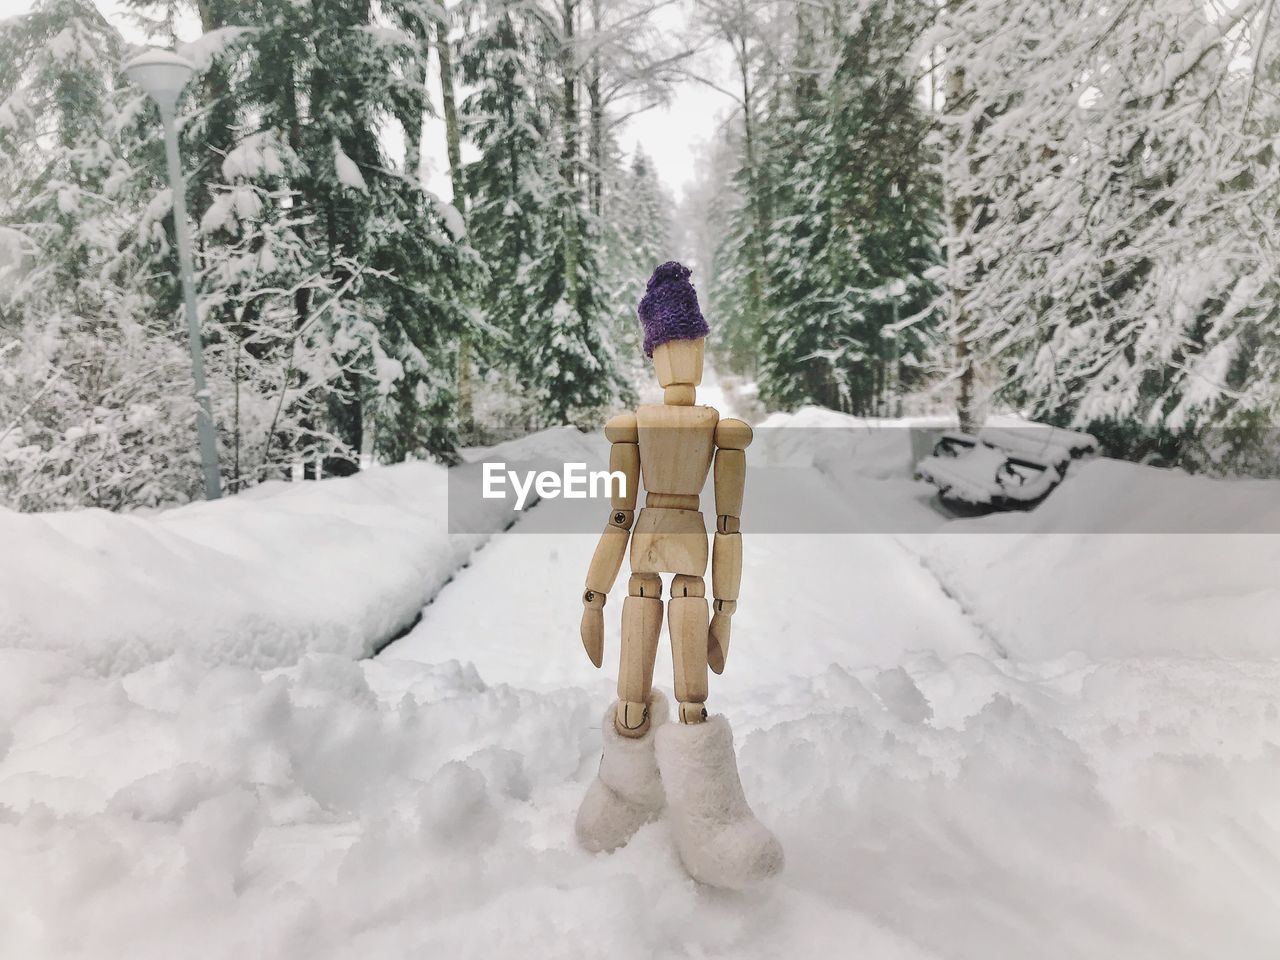 Figurine on snow covered field against trees